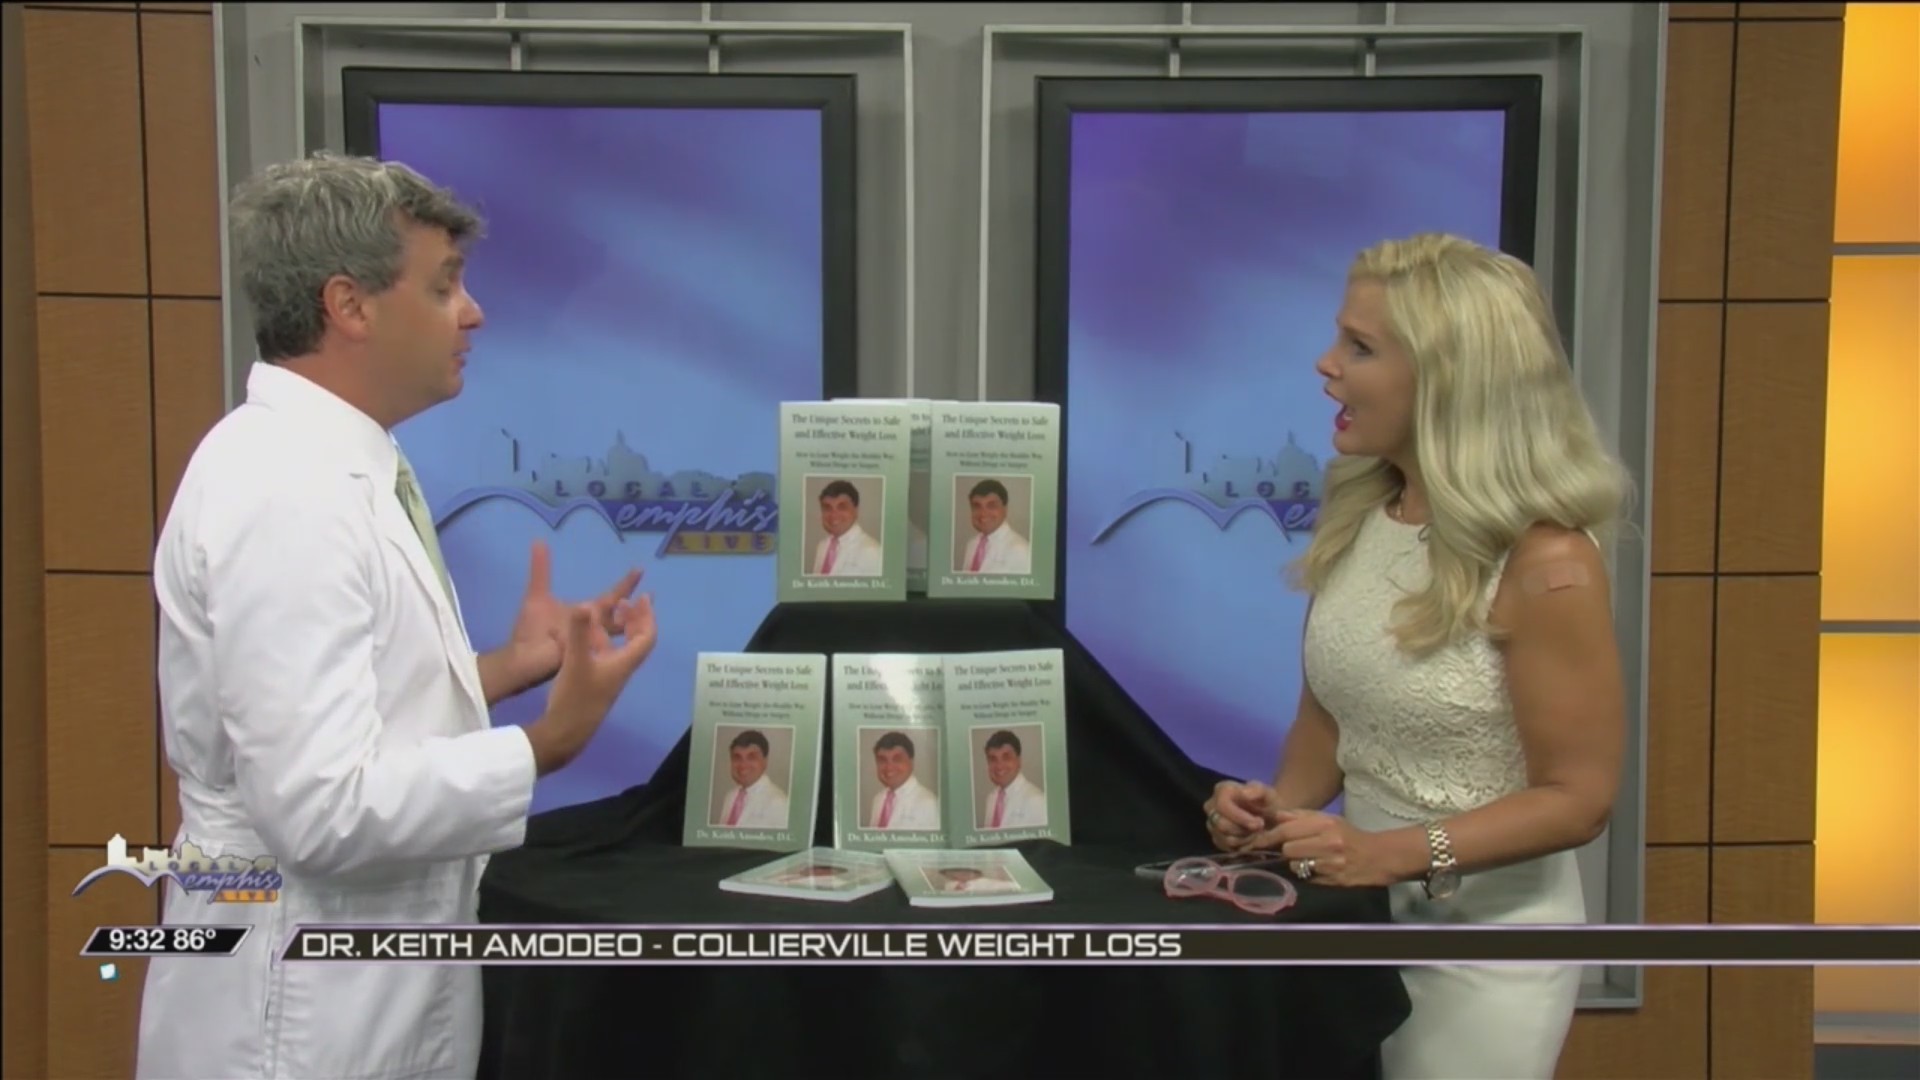 COLLIERVILLE WEIGHT LOSS - DR. KEITH AMODEO